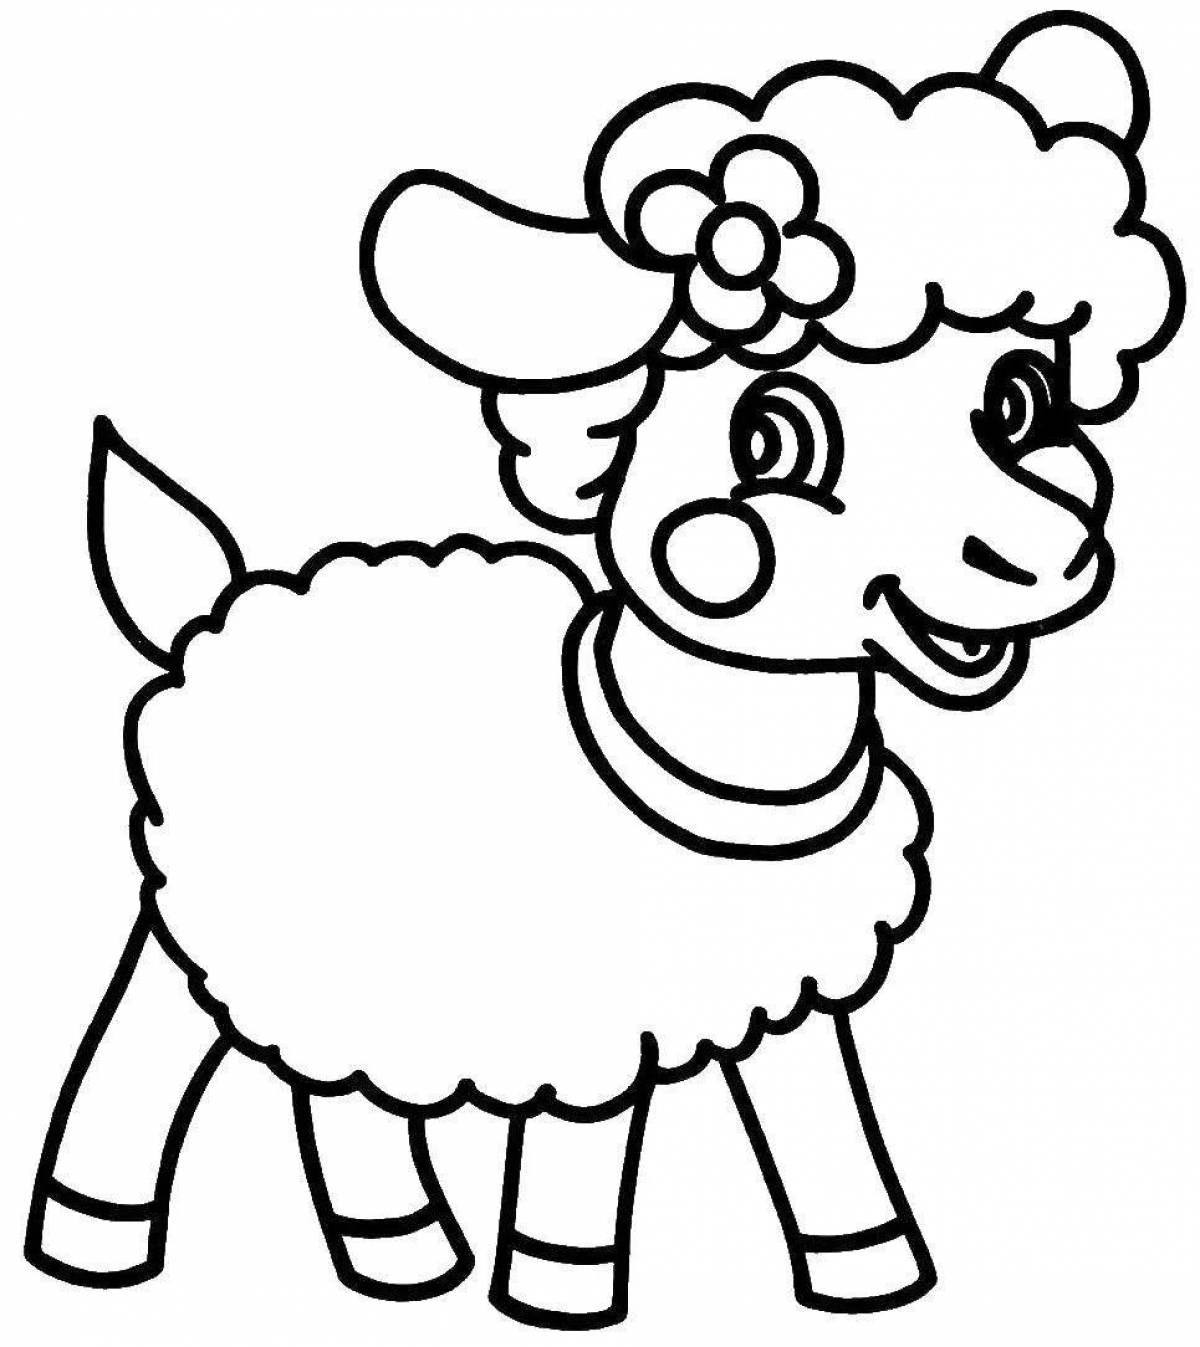 Sheep for children 4 5 years old #6